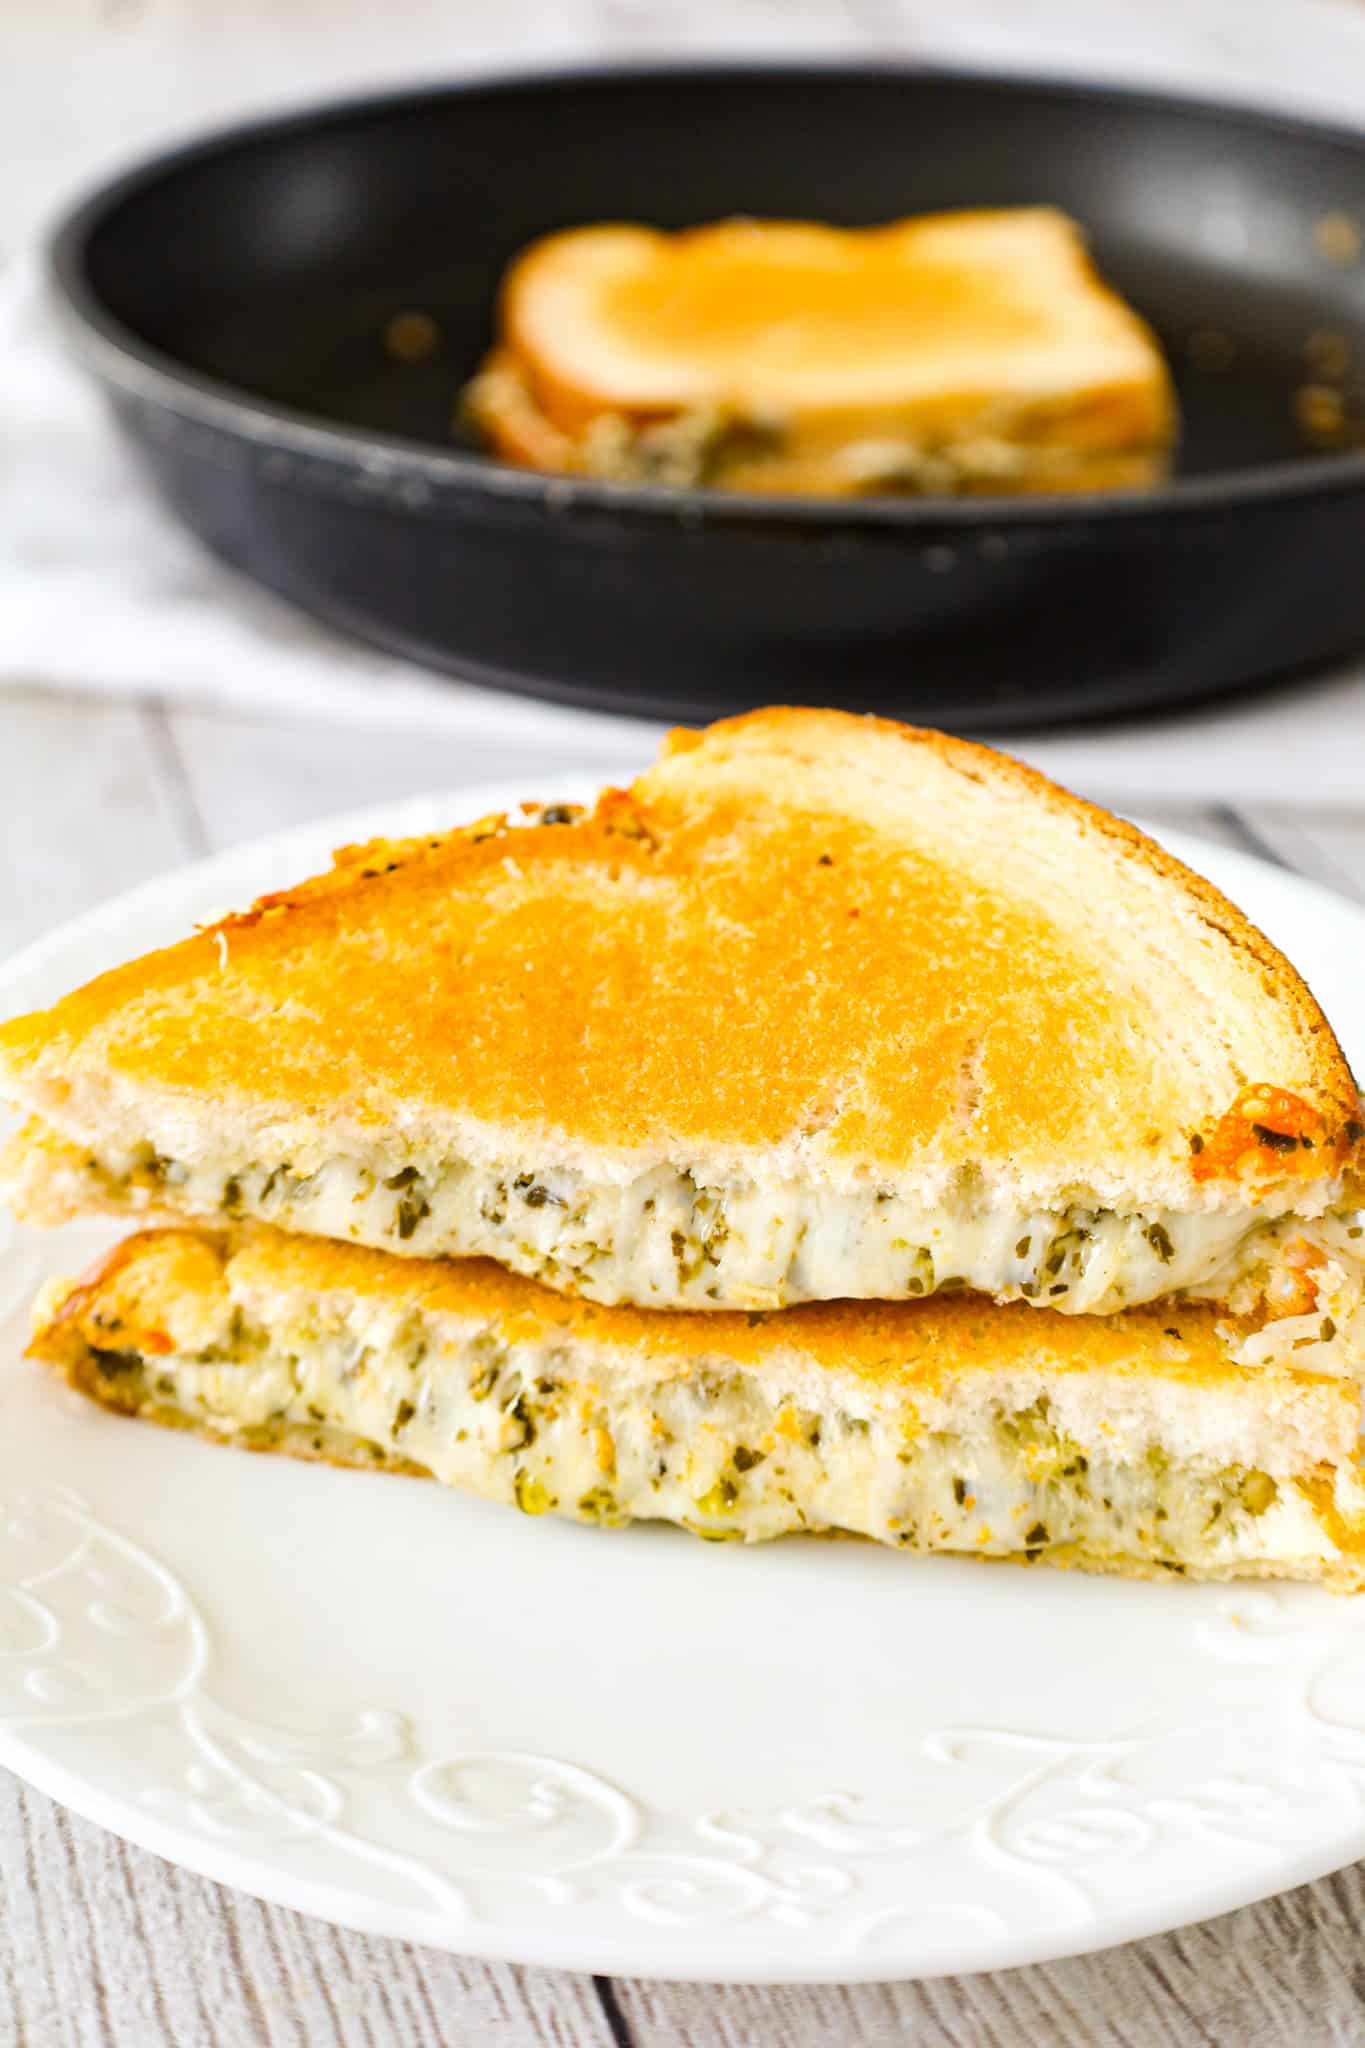 Pesto Grilled Cheese is an easy lunch or dinner recipe with buttered bread filled with gooey mozzarella, parmesan and basil pesto.